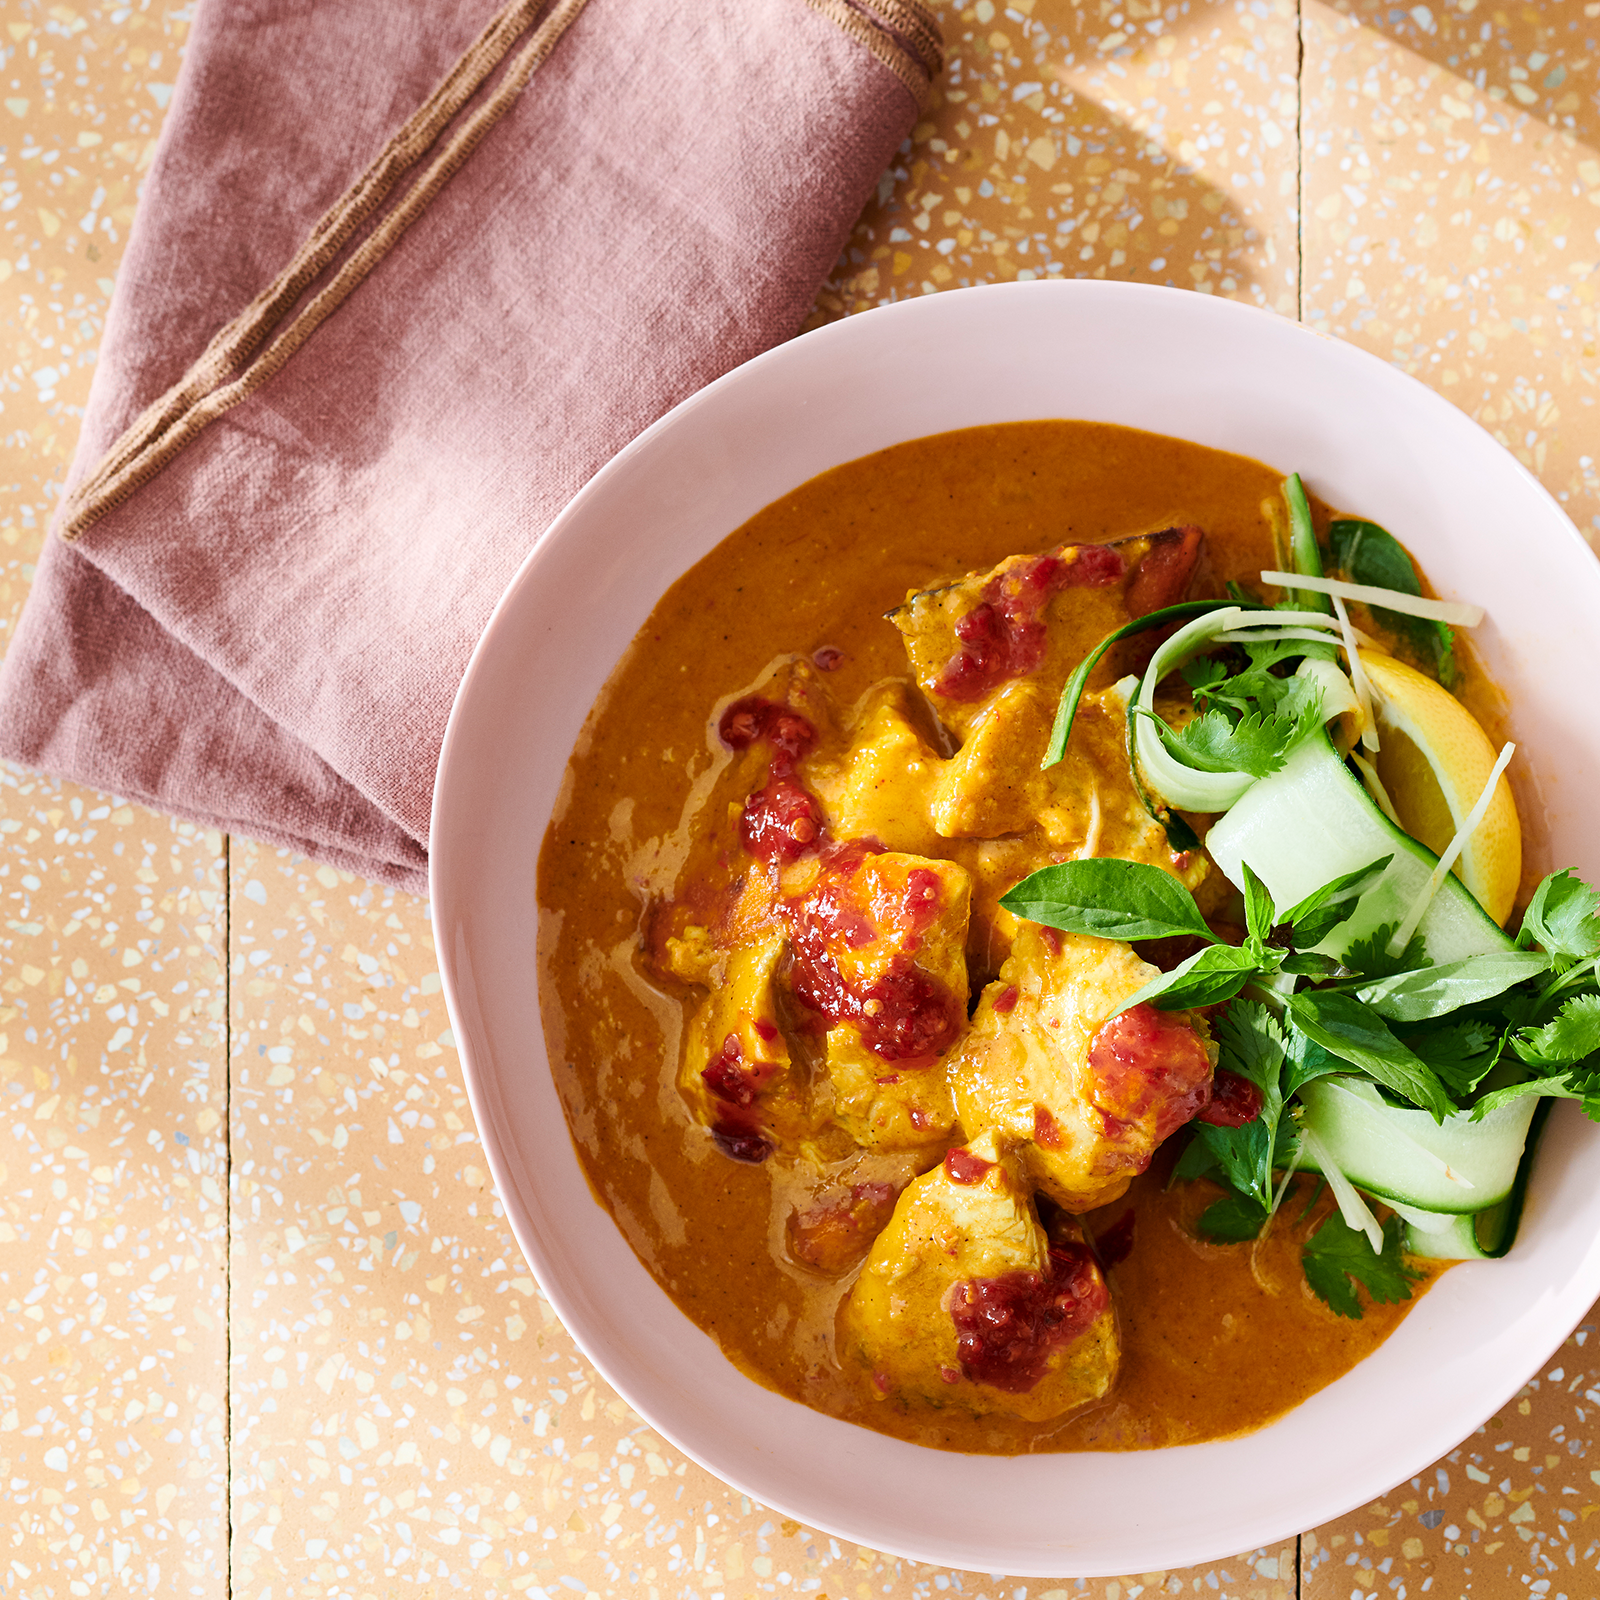 A pink bowl is filled with coconut fish curry and garnished with fresh herbs and thinly sliced cucumber. A dusty pink napkin rests to the side.